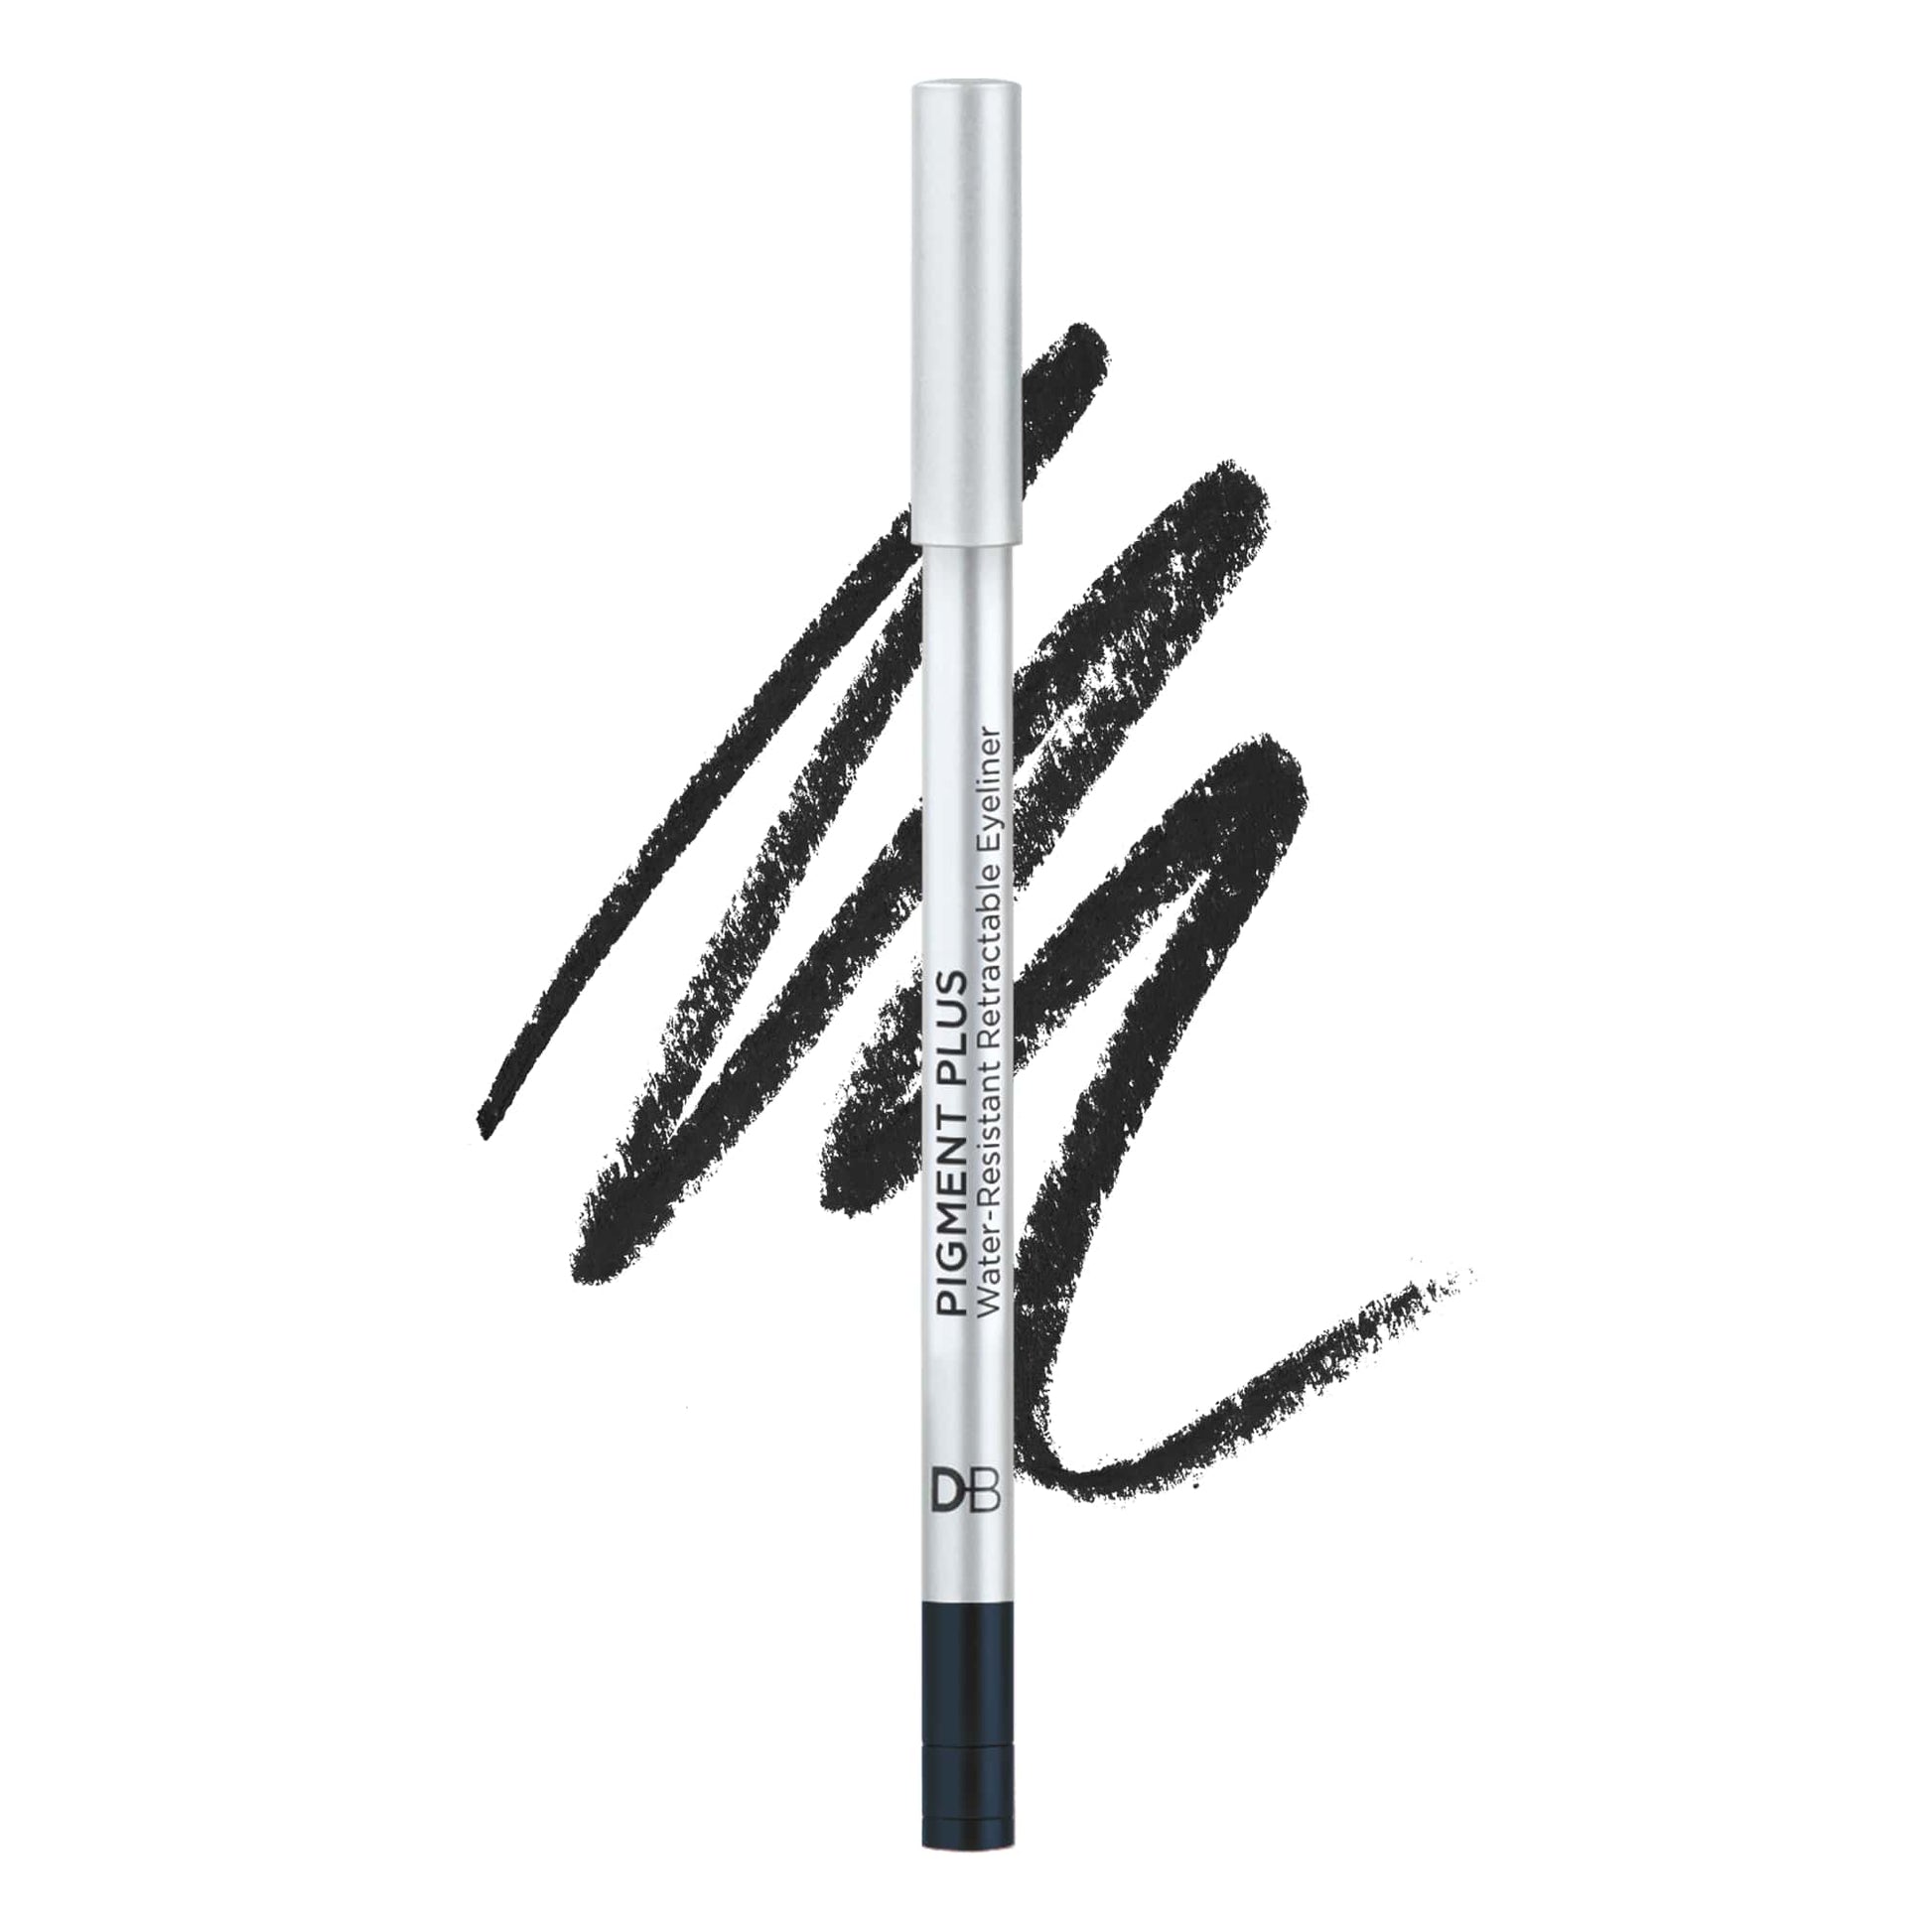 Pigment Plus Water Resistant Eyeliner (Black Abyss) with swatch | DB Cosmetics